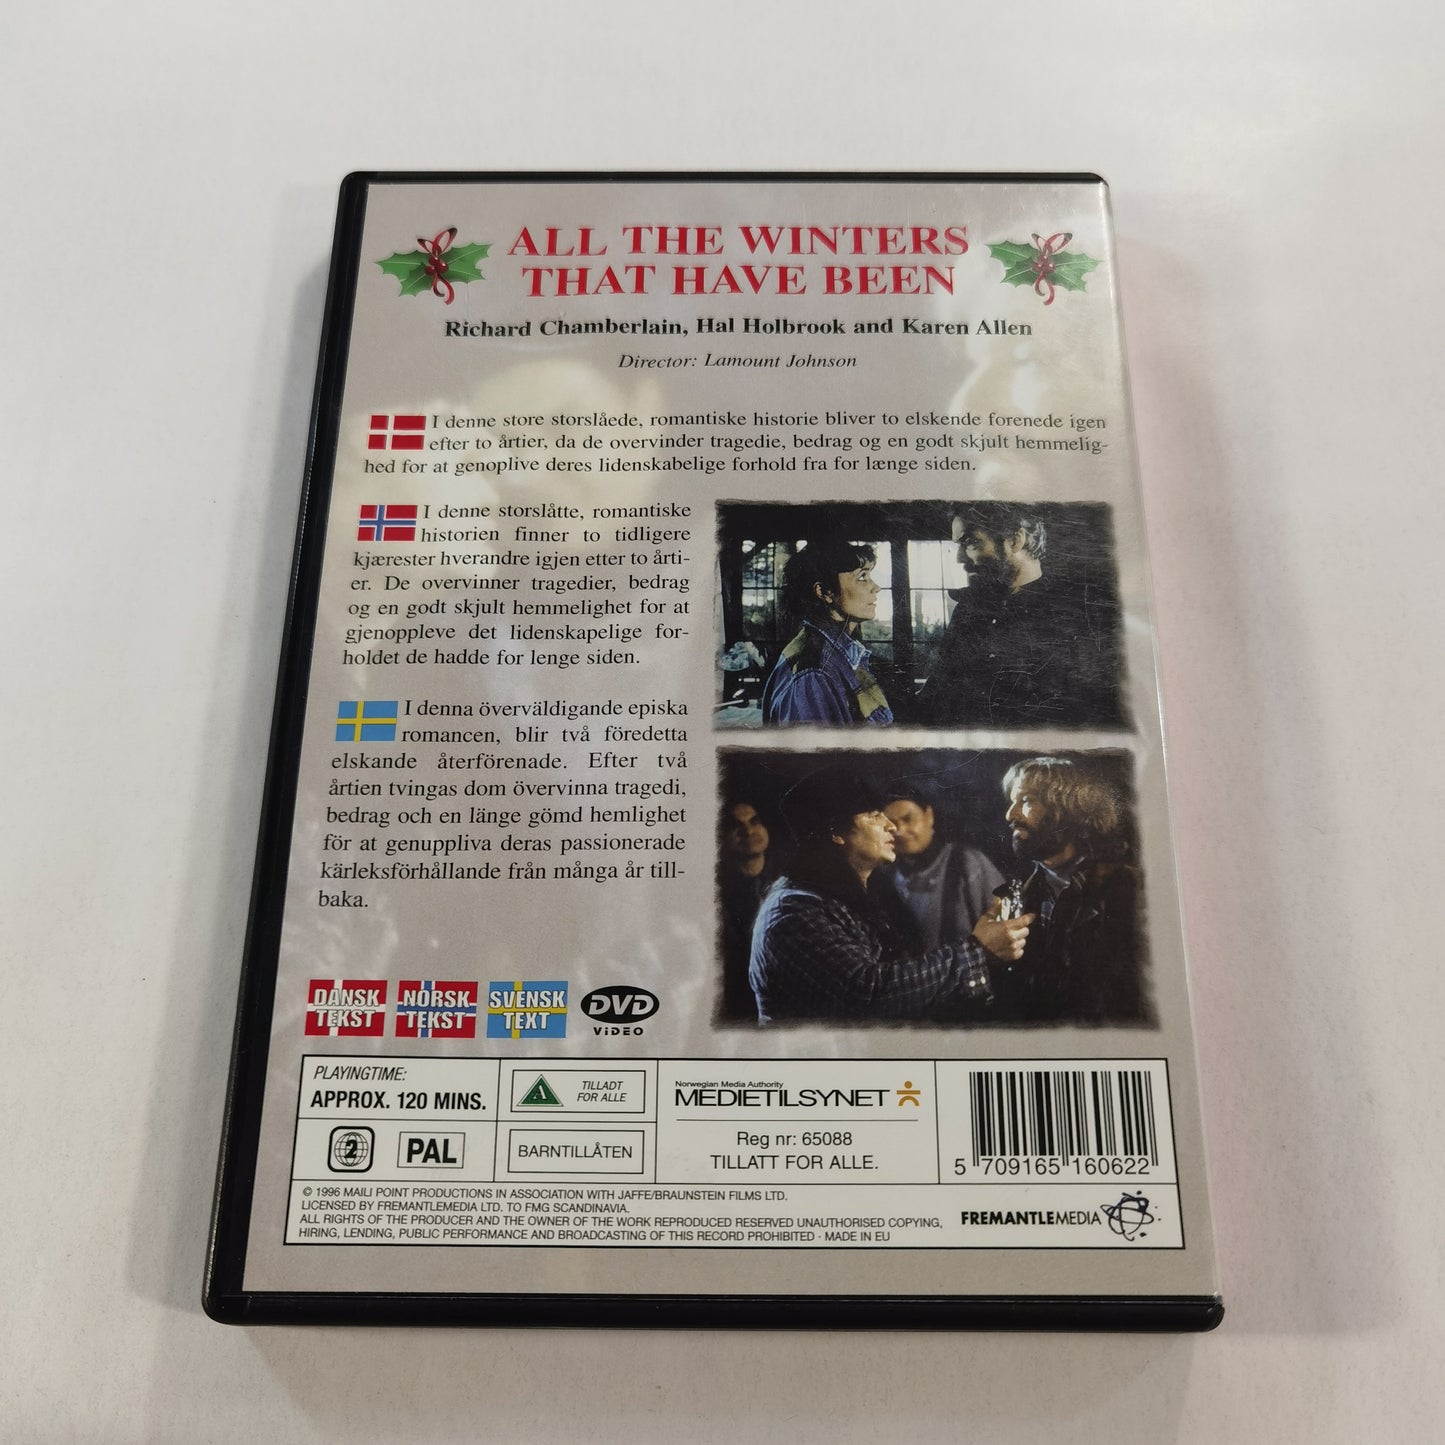 All the Winters That Have Been (1997) - DVD SE NO DK